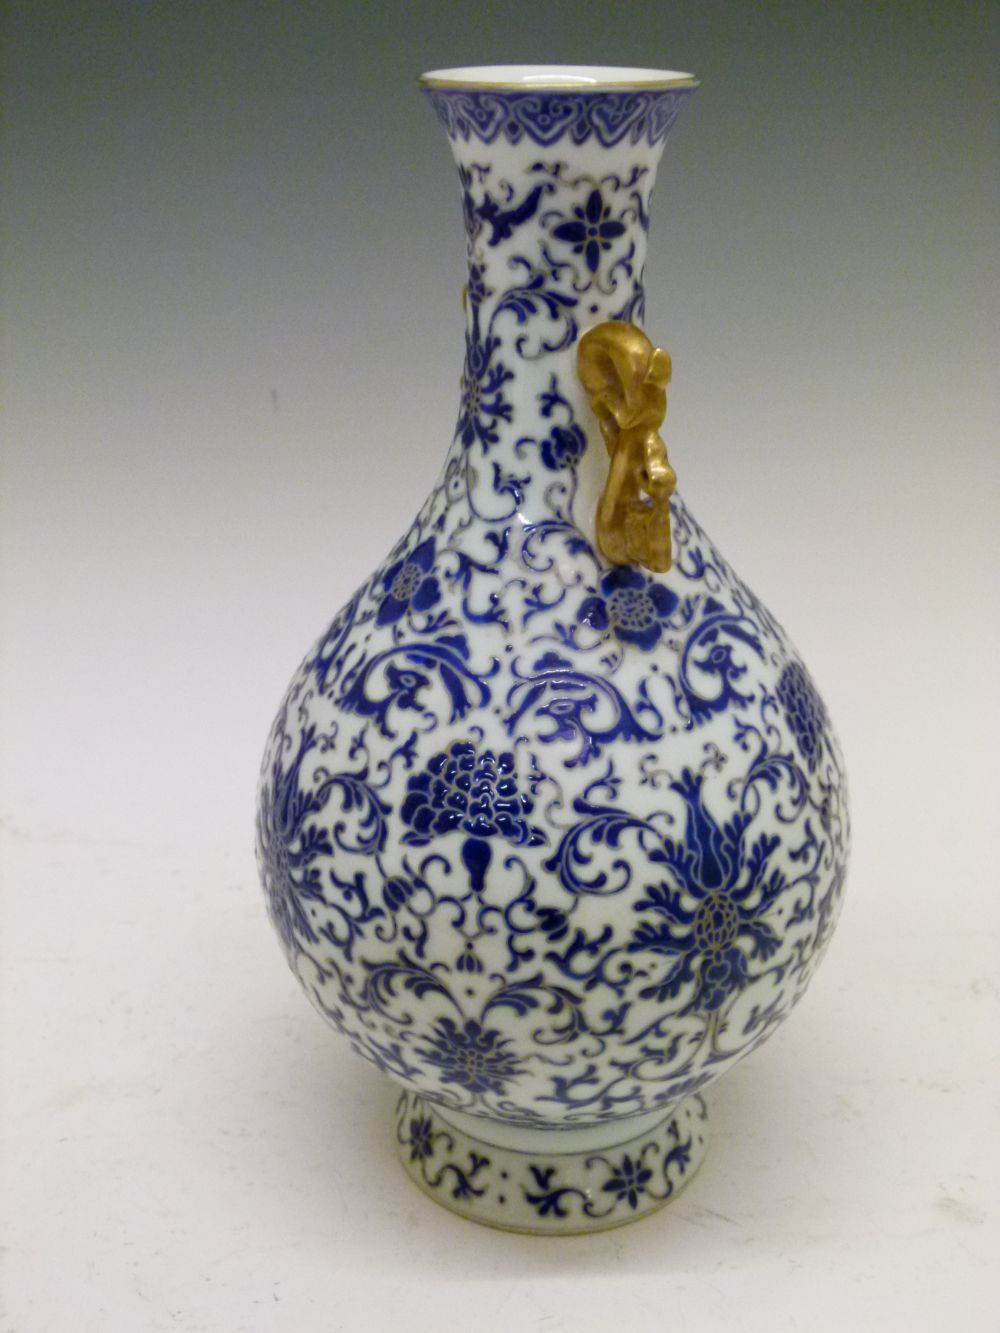 Chinese porcelain vase, of bulbous form with gilt handles and Royal blue enamel Ming-style floral - Image 4 of 10